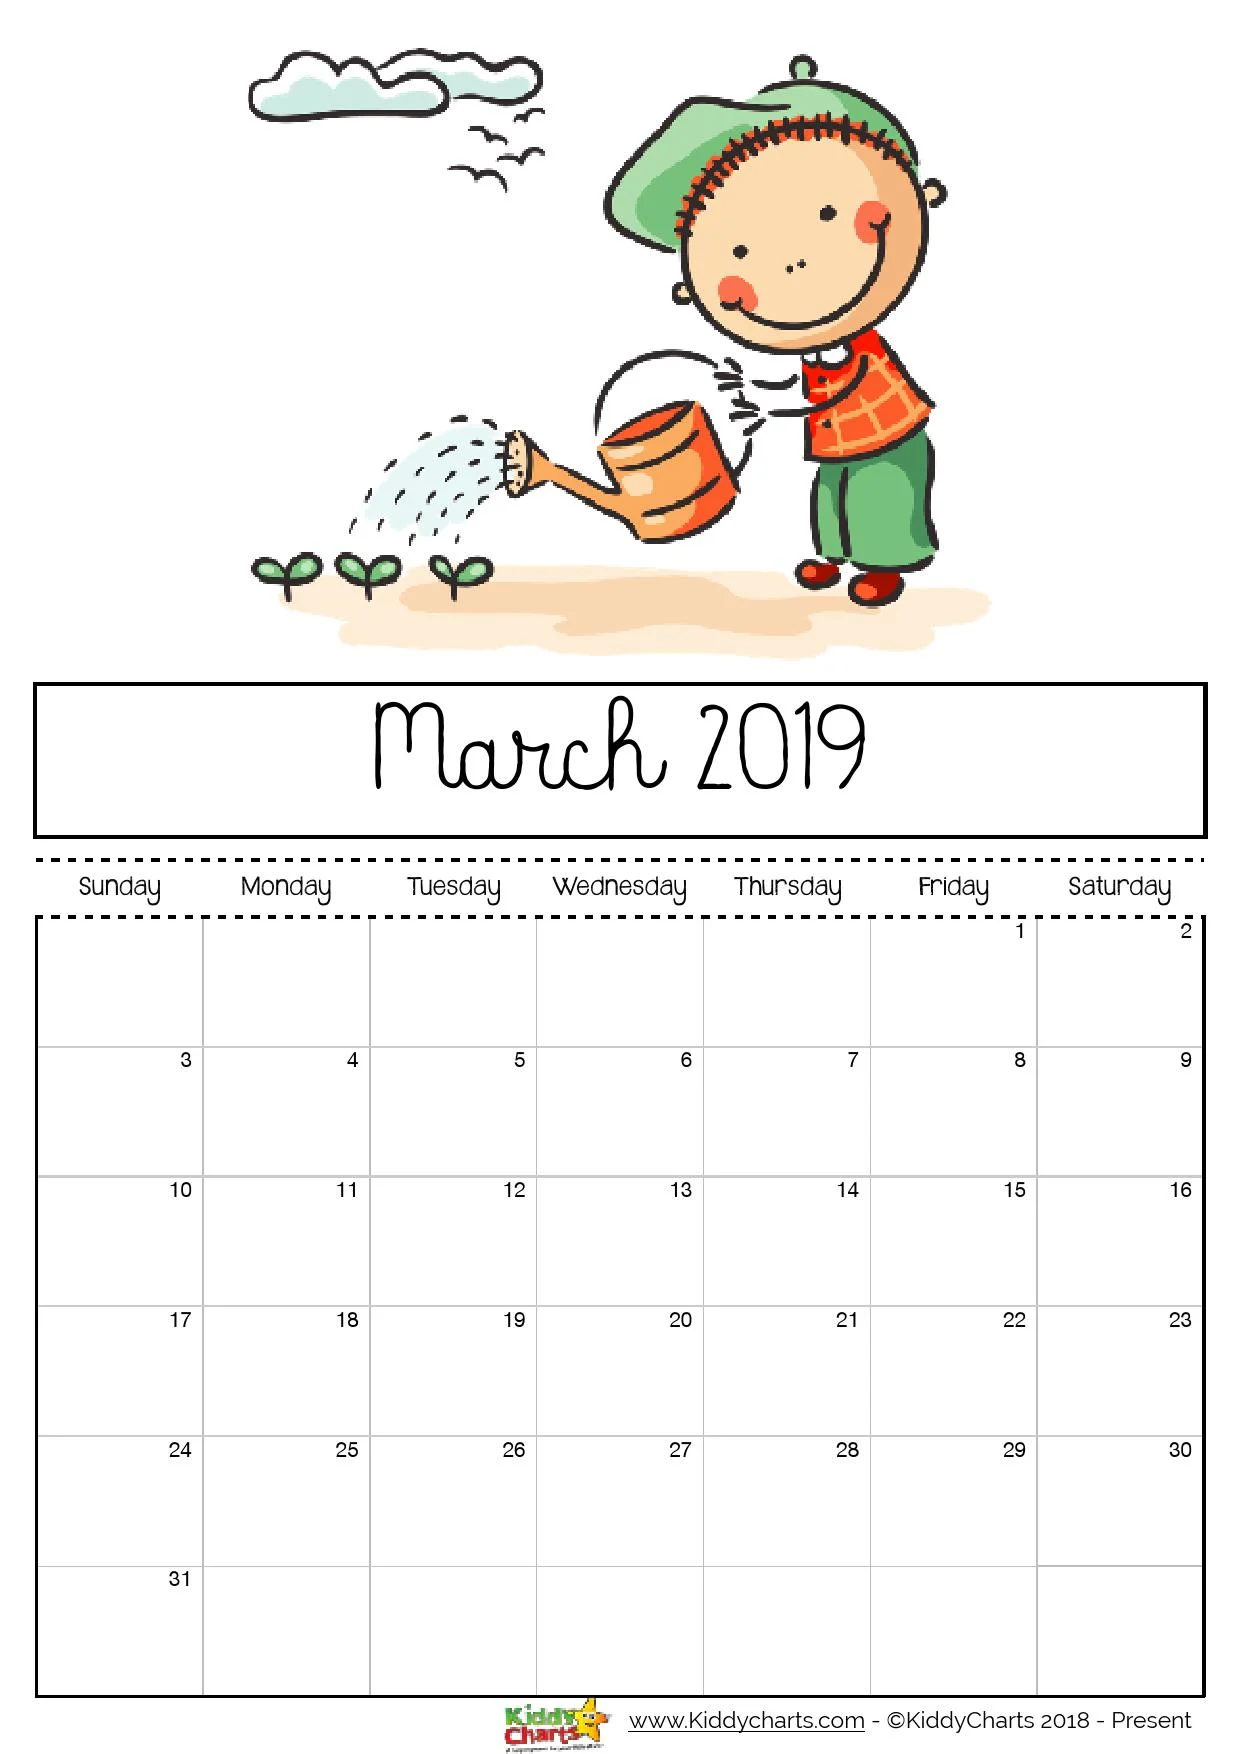 Girl watering her garden with a watering can. She can come and help me anyday! #printables #kidsprintables #2019calendar 